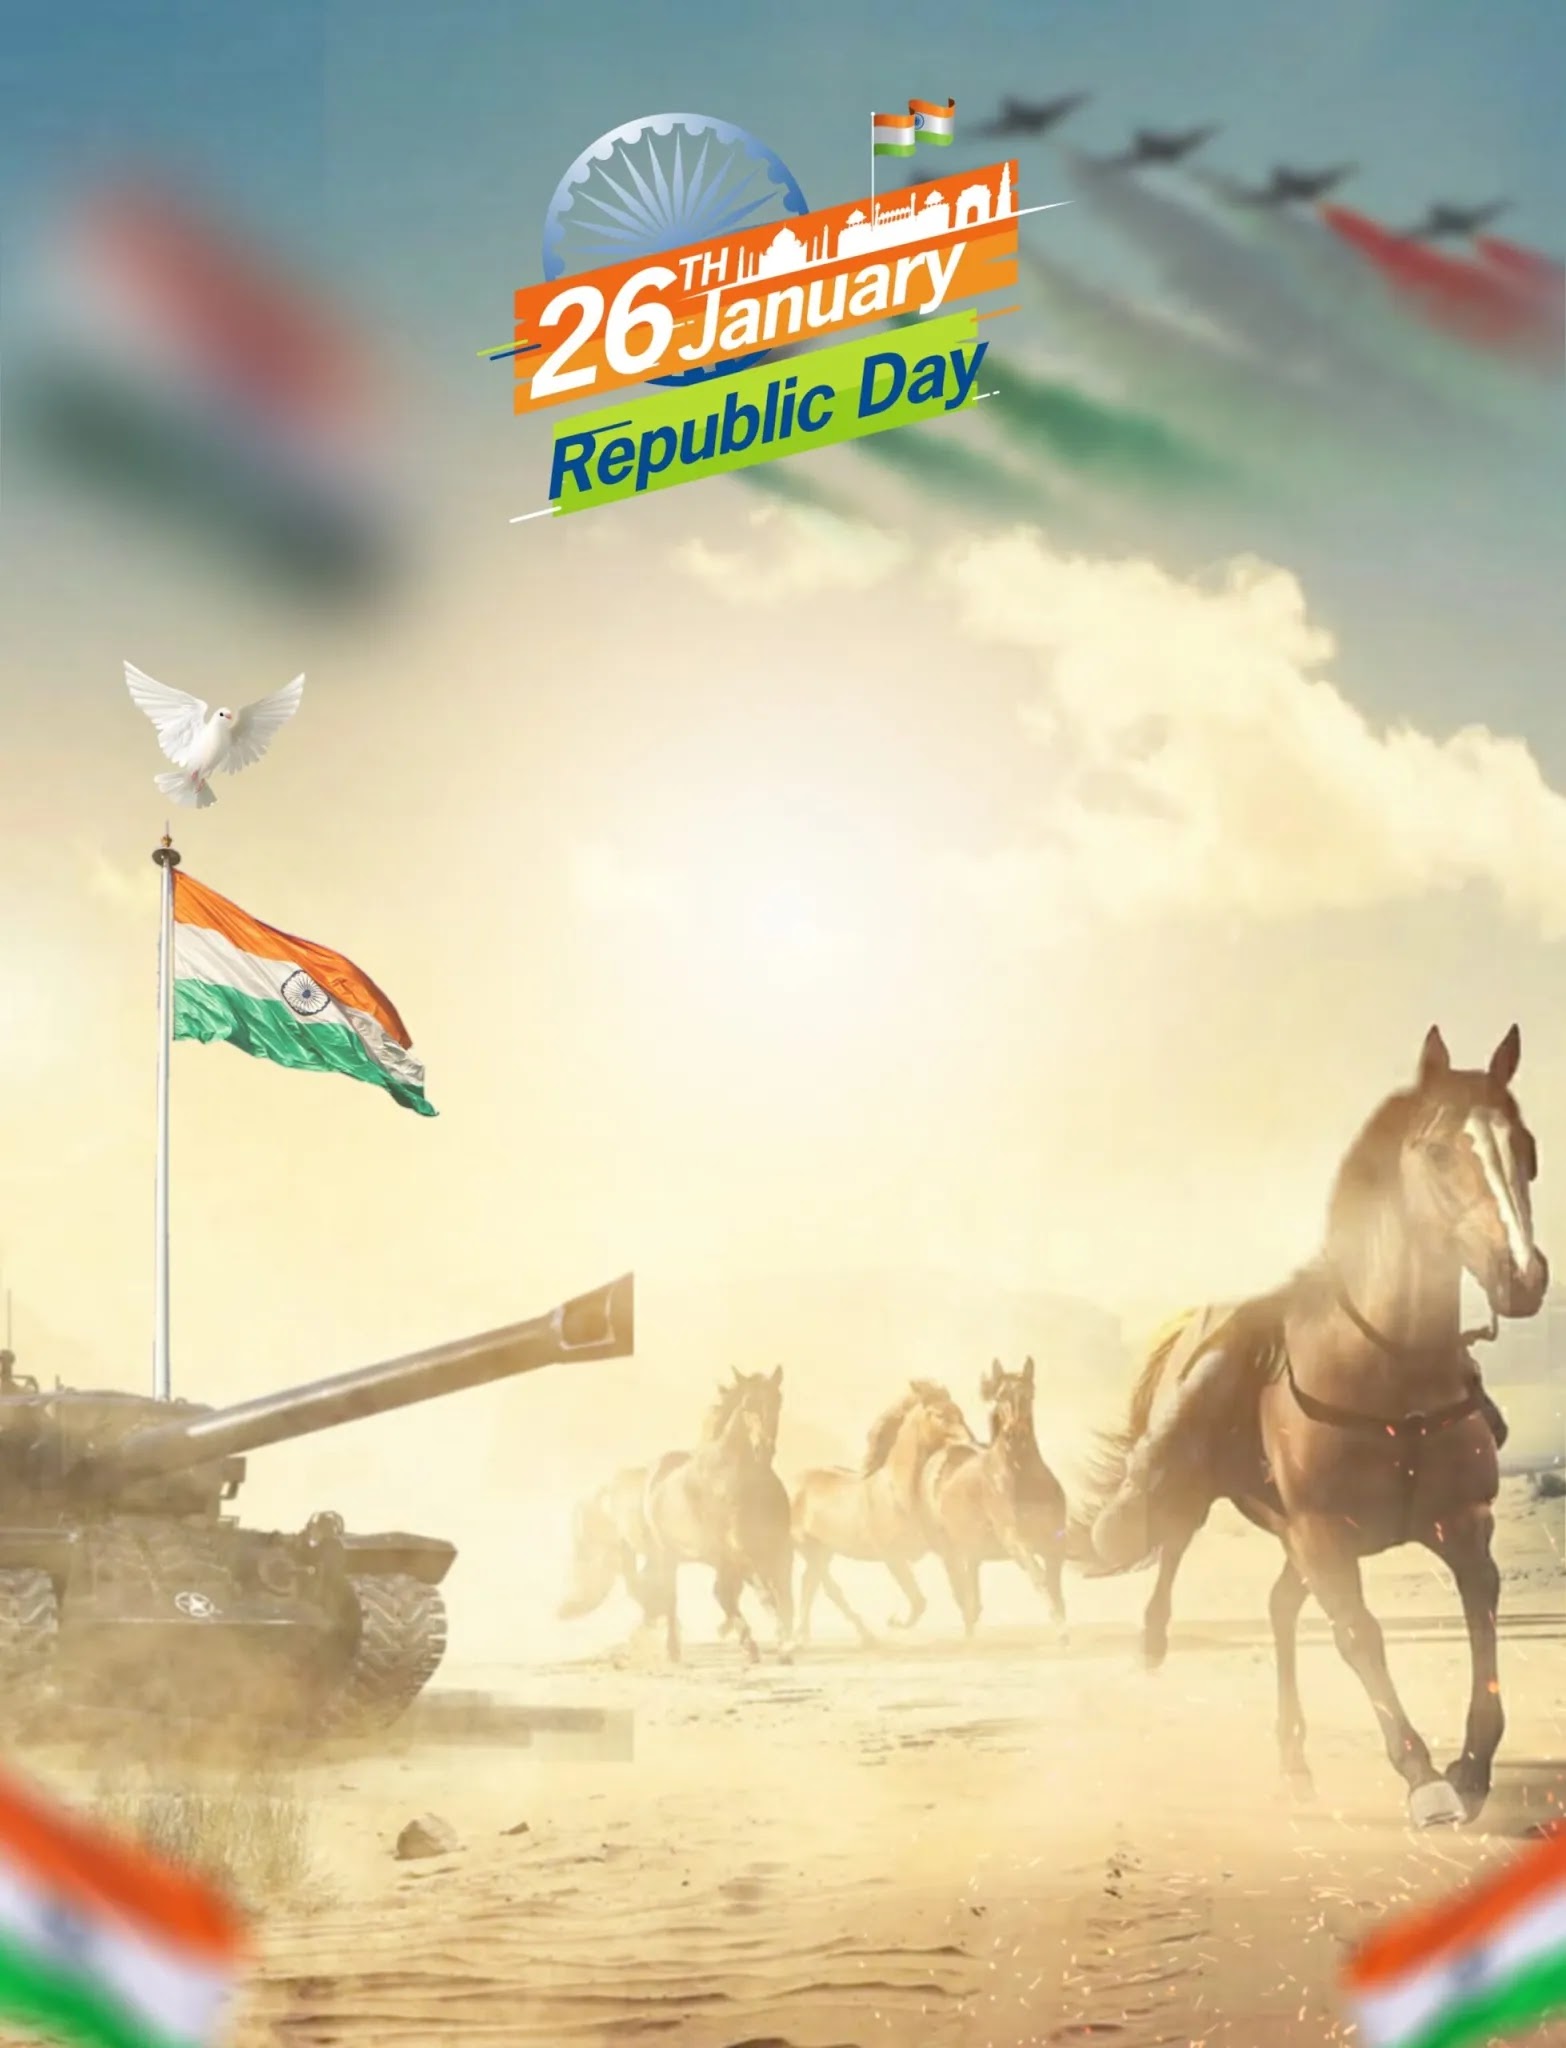 500+ Republic Day (26 January) Special Photo Editing Backgrounds Images HD 2021